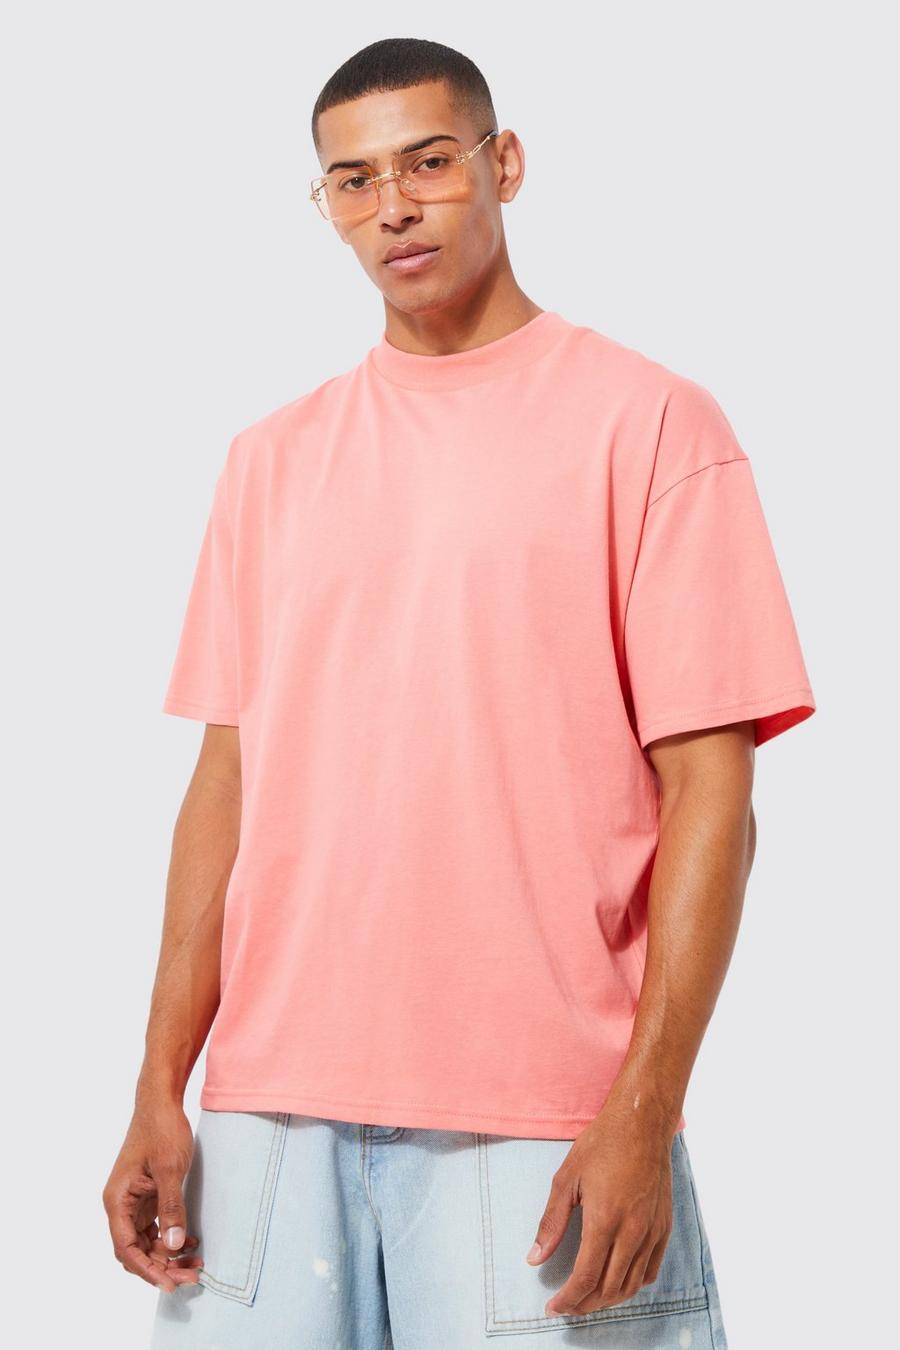 Coral rose Man Oversized Extended Neck T-shirt